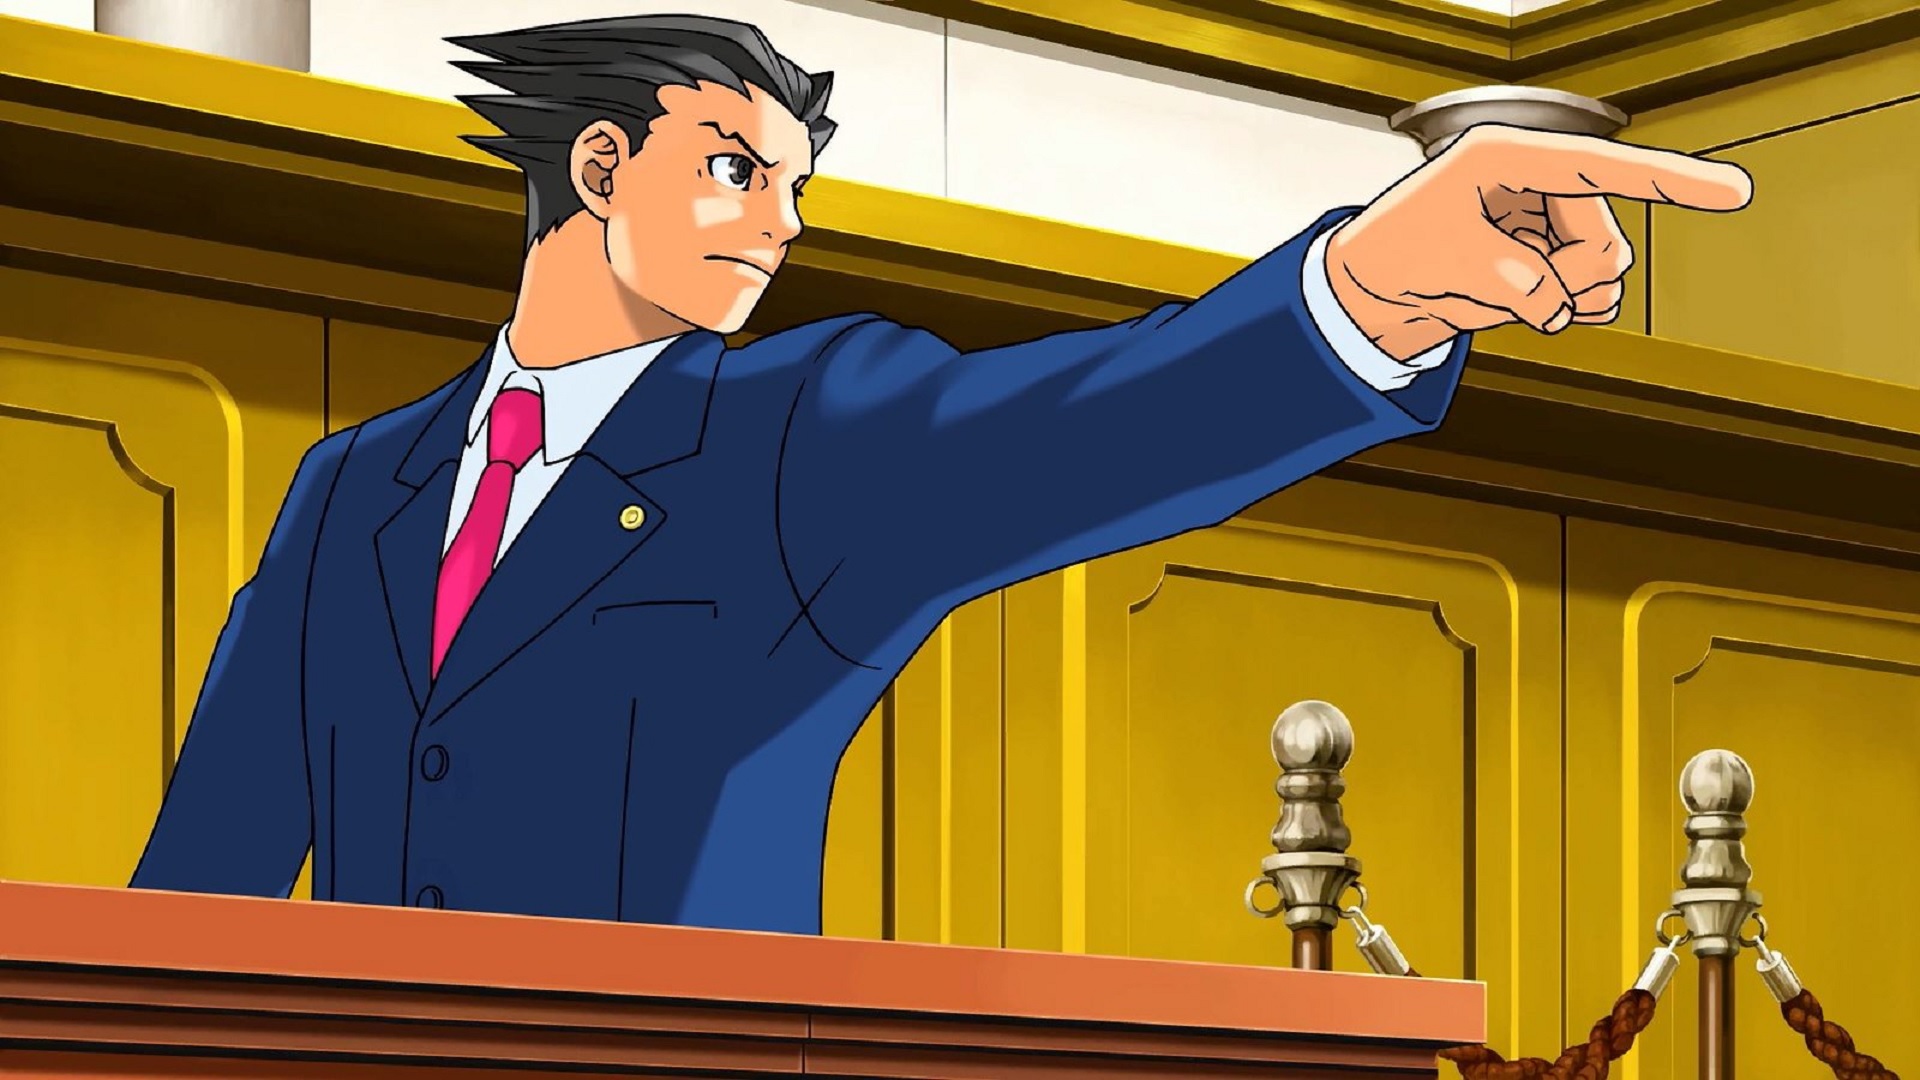 best-anime-games-phoenix-wright-ace-attorney-trilogy-remastered.jpg